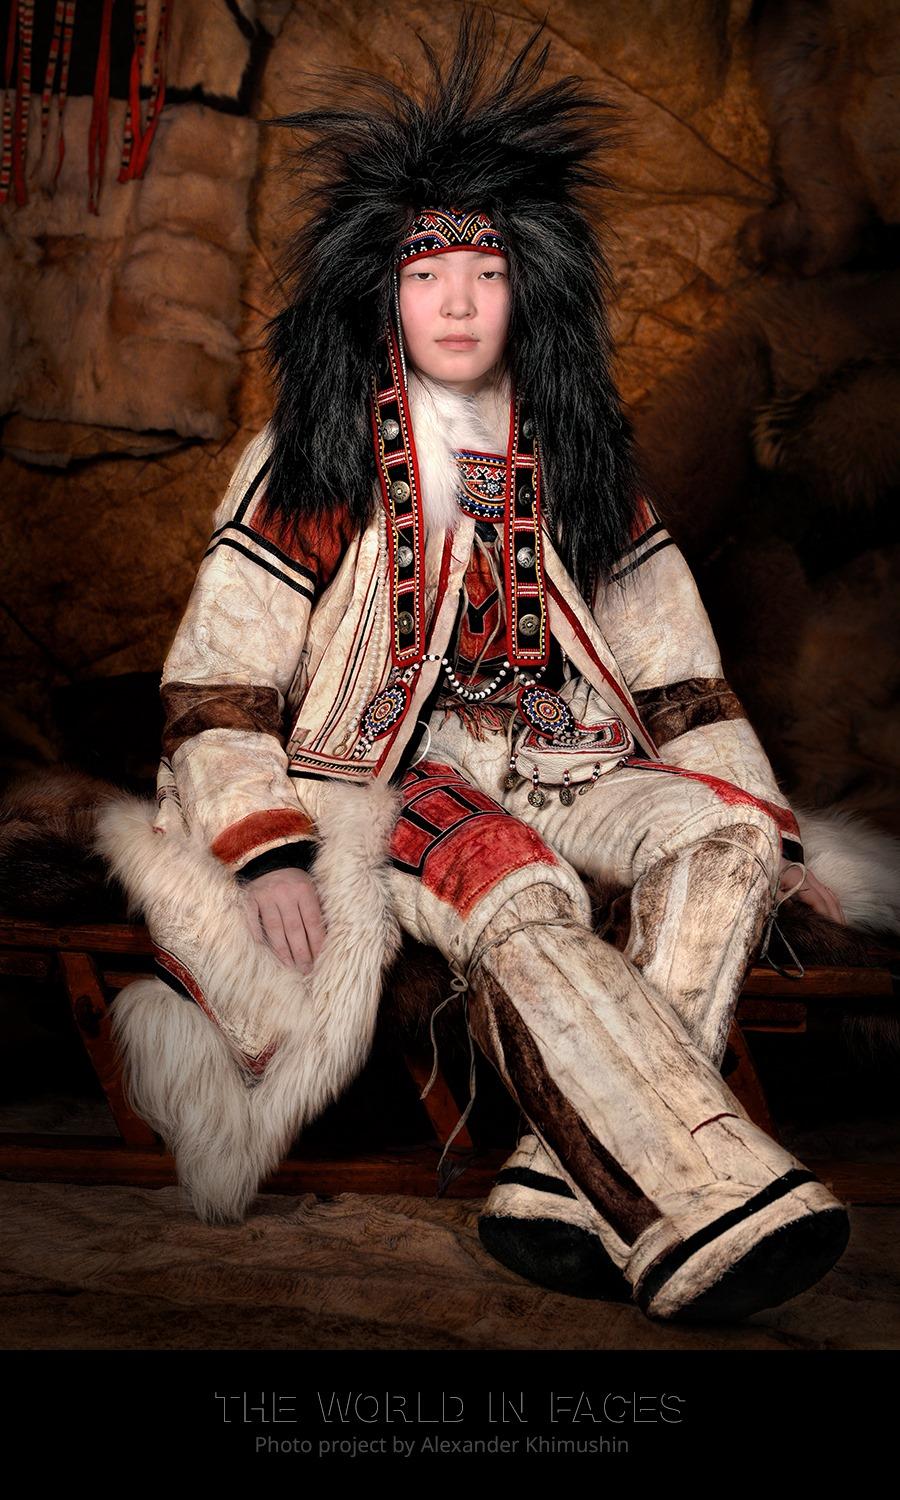 Violetta Chunanchar, one of the remaining 862 Nganasan indigenous people of the Arctic part of Northern Siberia (© <a href="https://www.facebook.com/xperimenter">Alexander Khimushin</a> / The World In Faces)